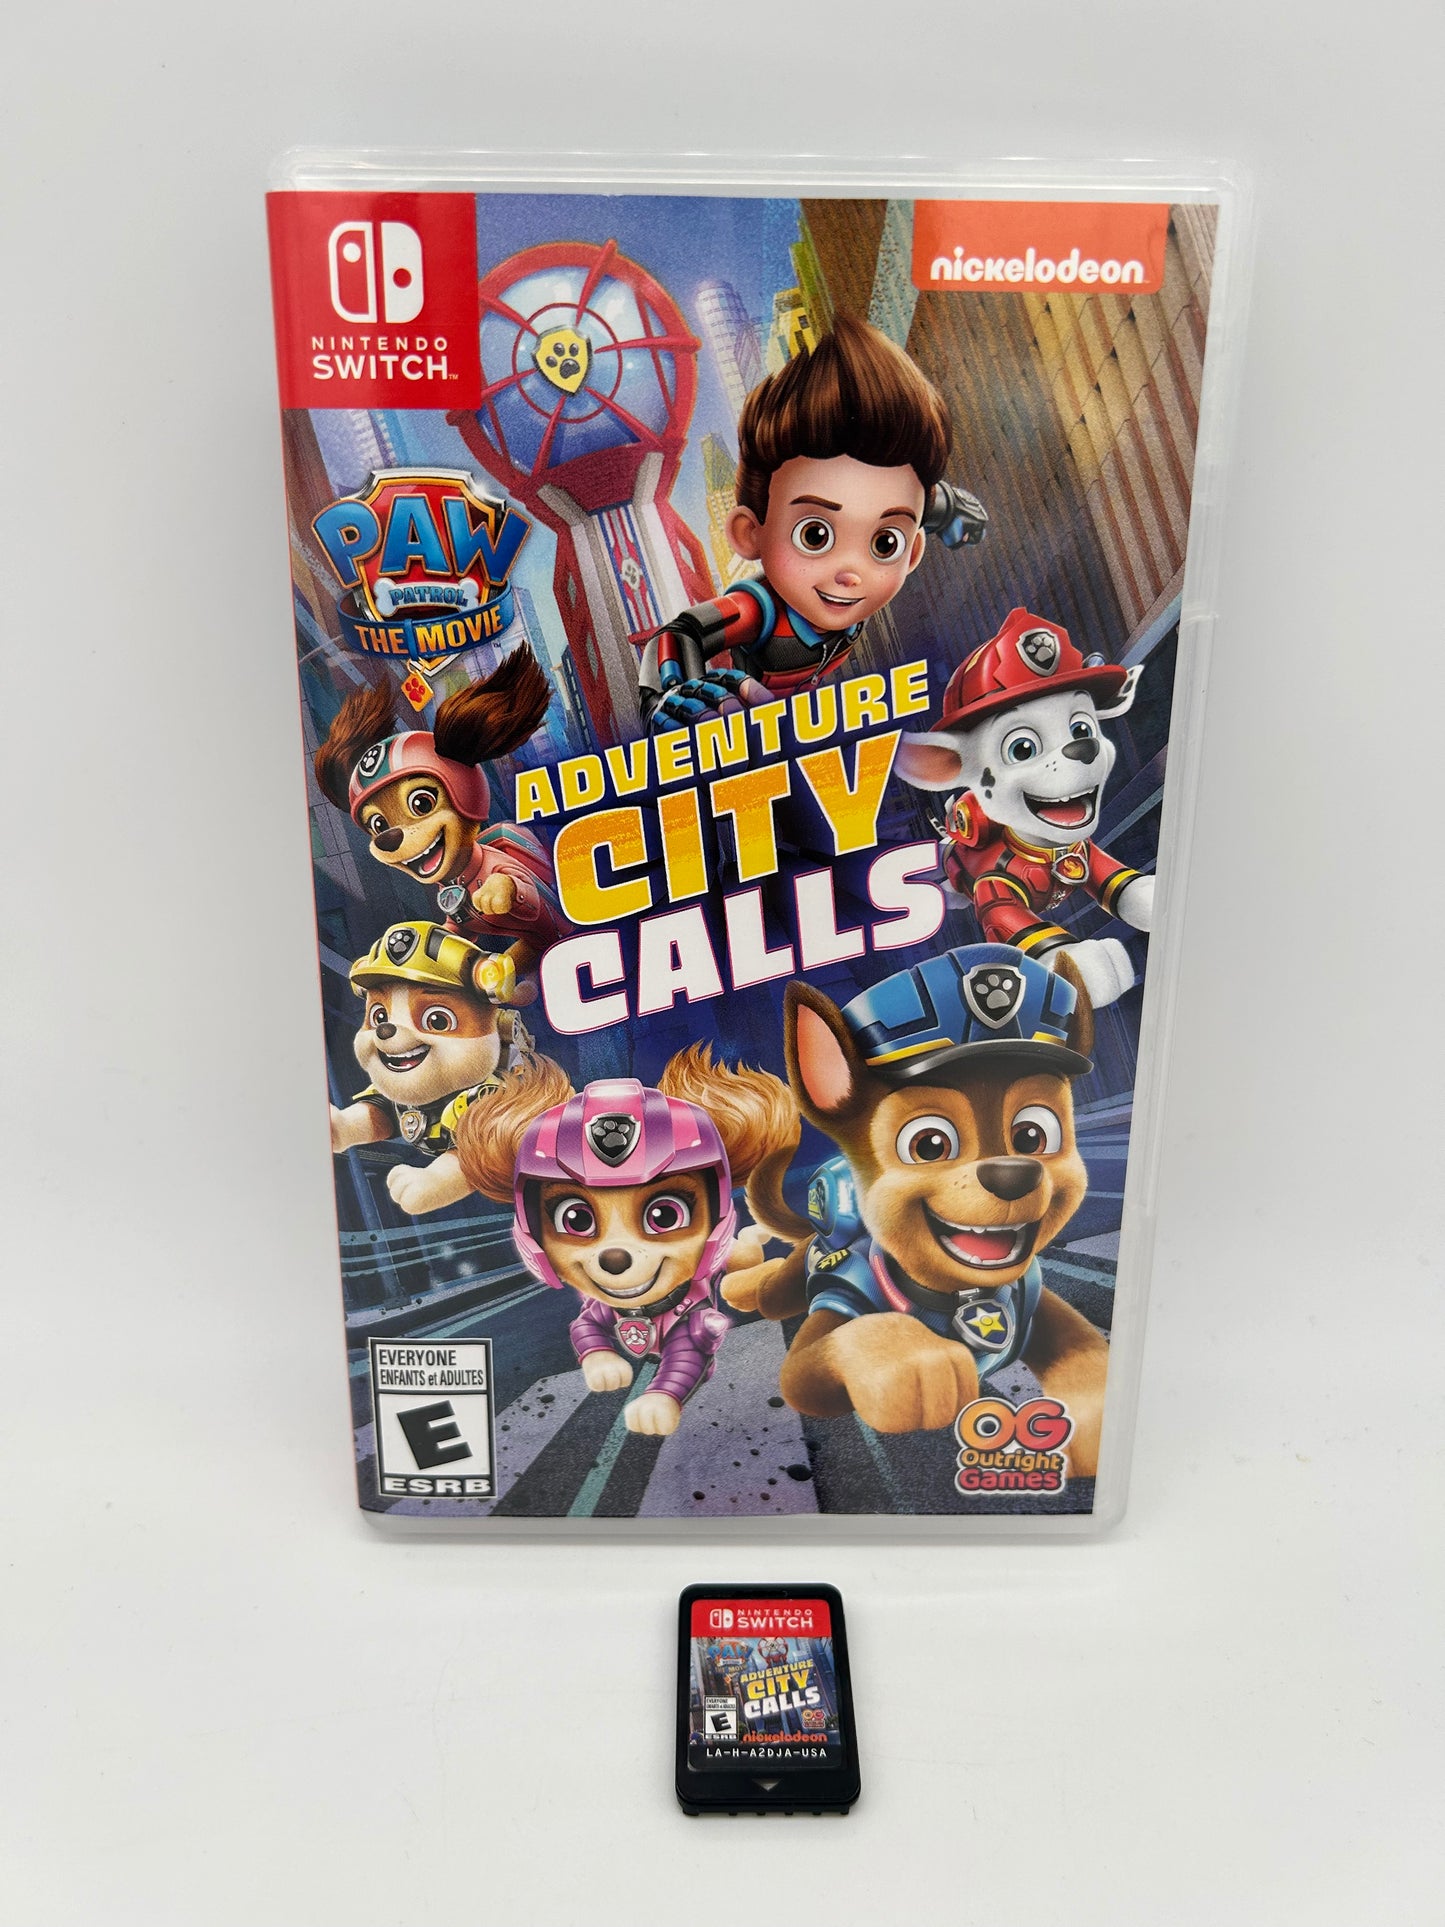 PiXEL-RETRO.COM : NINTENDO SWITCH COMPLETE IN BOX COMPLETE MANUAL GAME NTSC PAW PATROL THE MOVIE ADVENTURE CITY CALLS